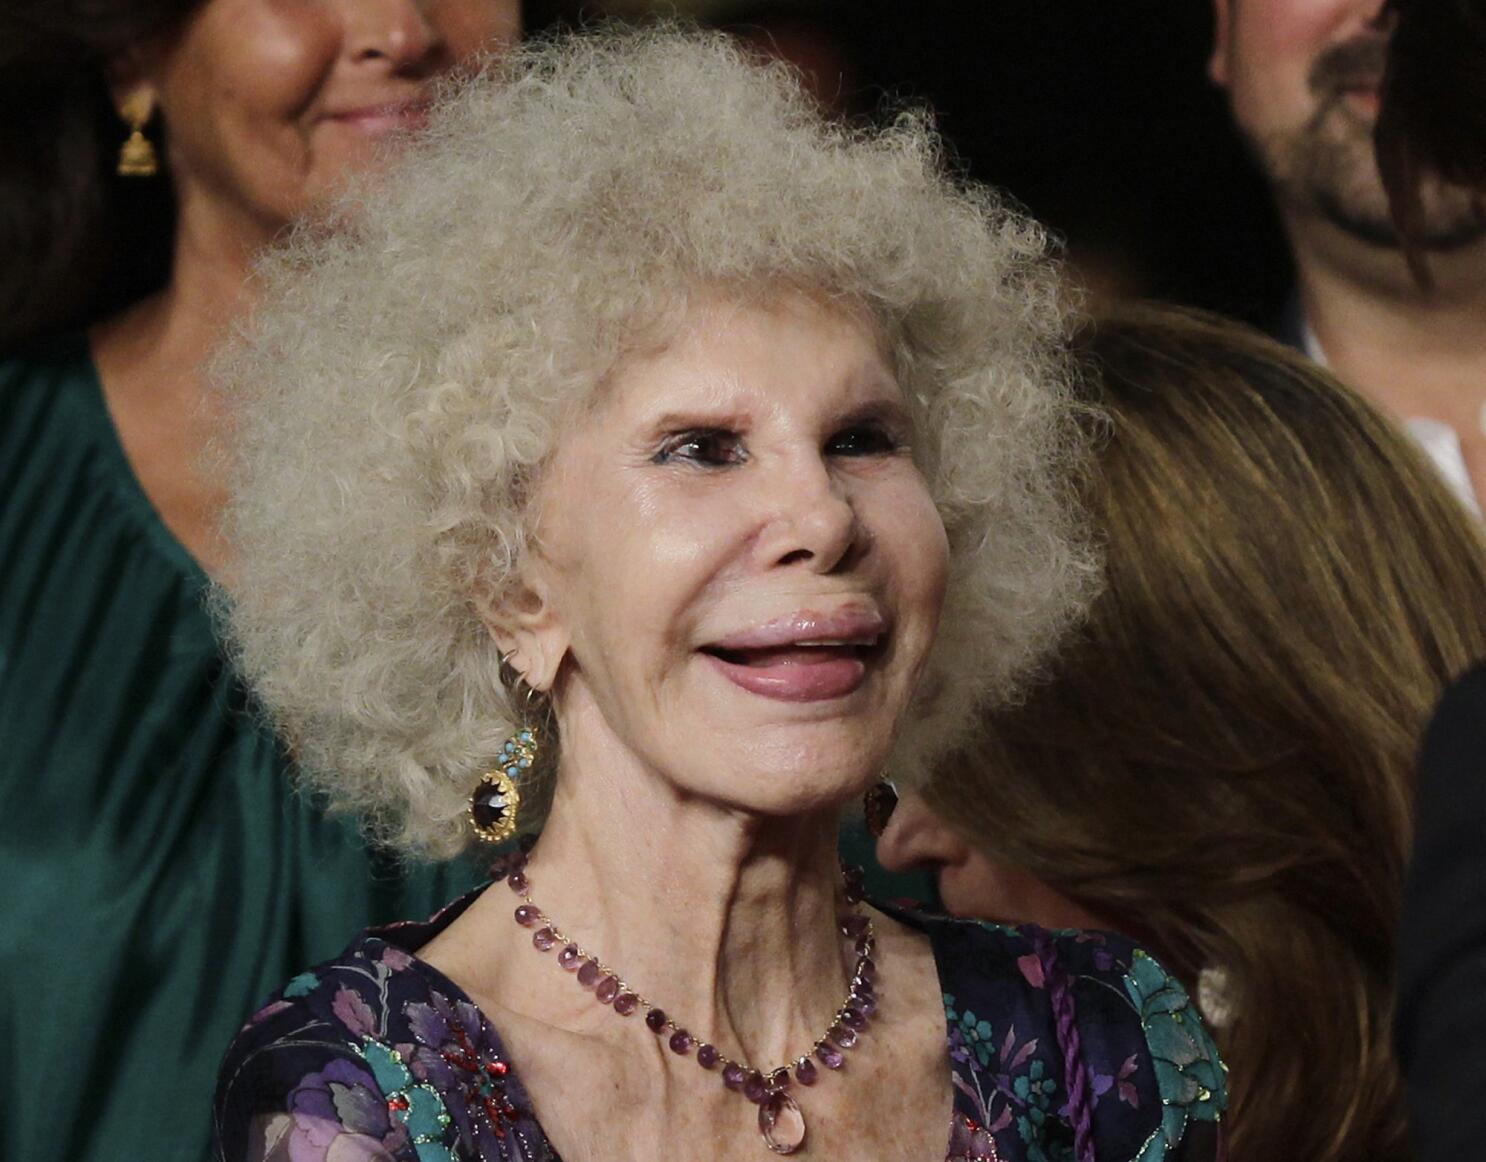 The Duchess of Alba's Wedding Dress Goes on Display in Madrid